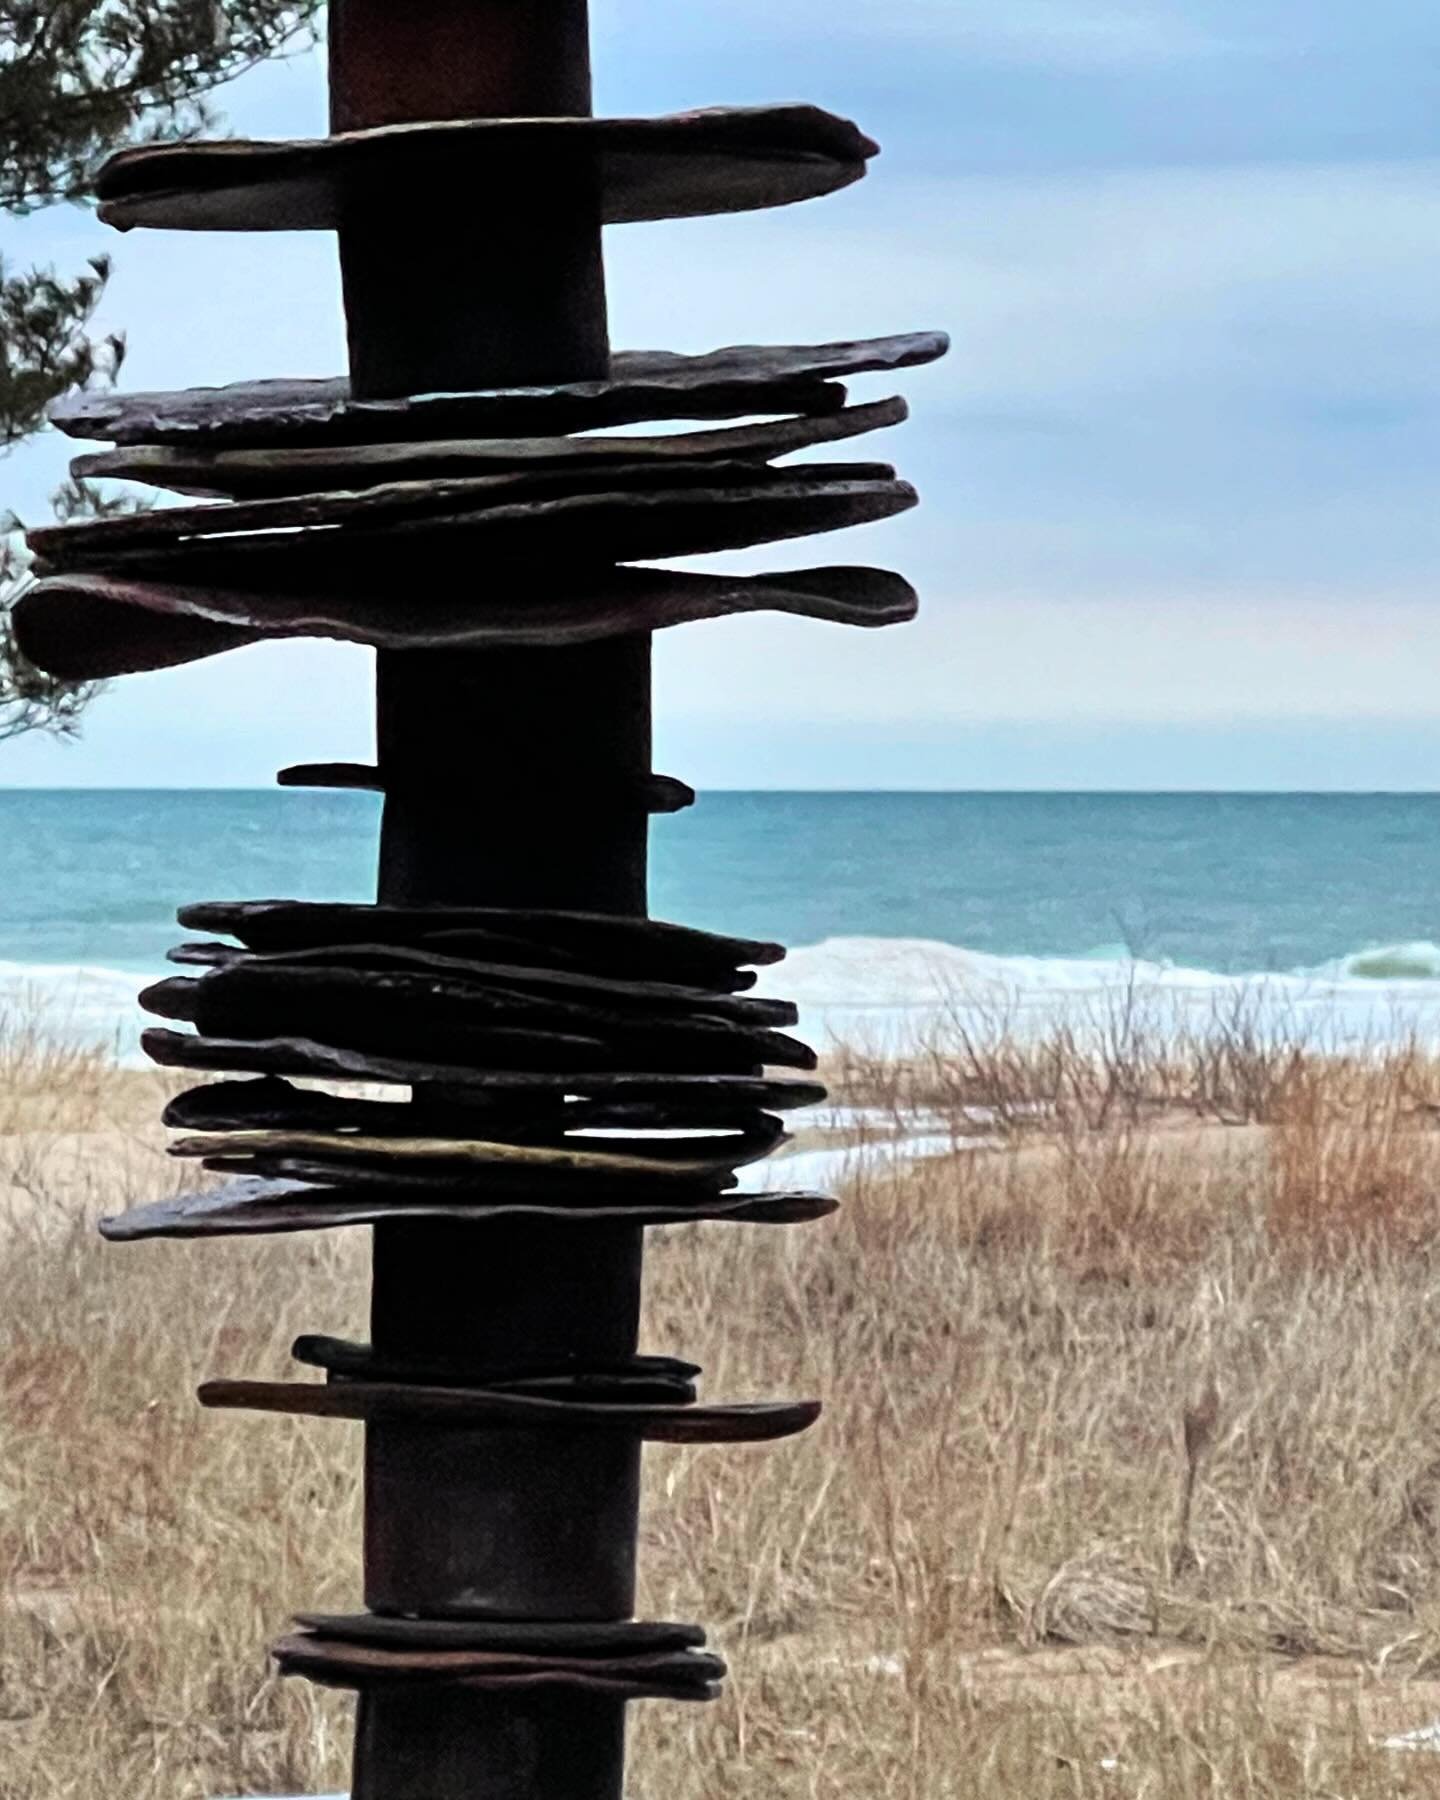 This totem is one of several installed in sculpture parks around the state. I think about my totems as messengers holding space for meditation on the perimeters and edges of our potential; the horizon line where hope meets the known and the unknown. 